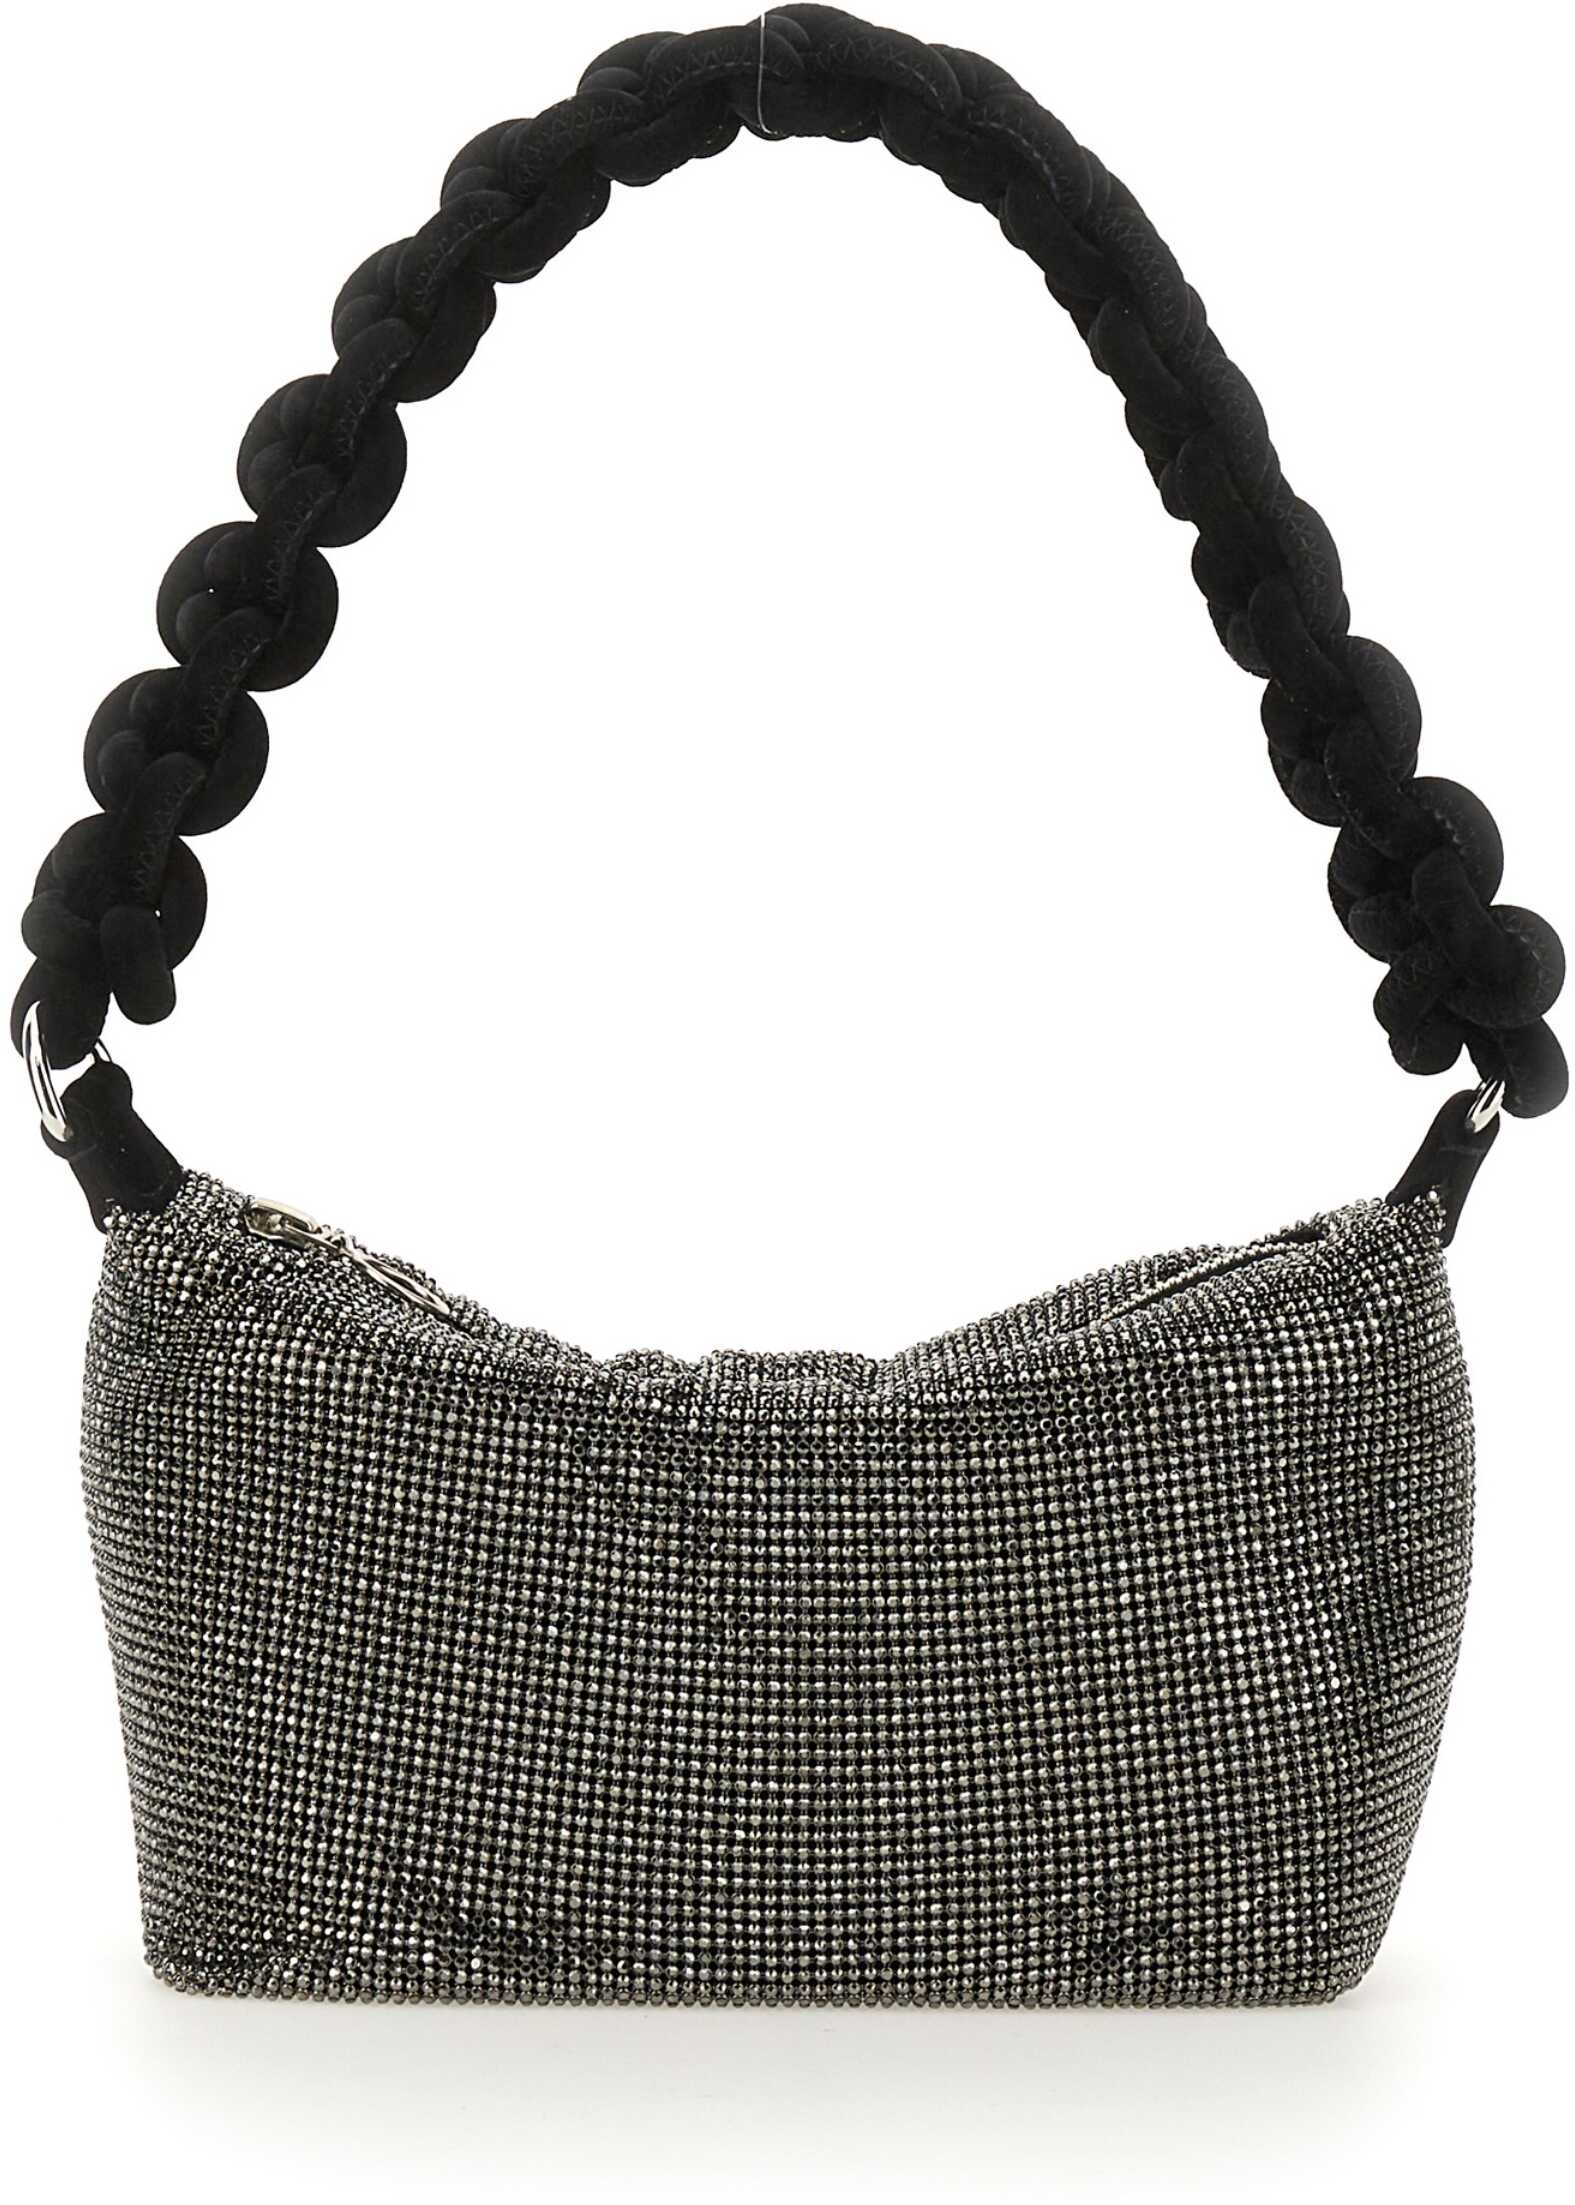 KARA Bag With Knotted Handle CHARCOAL